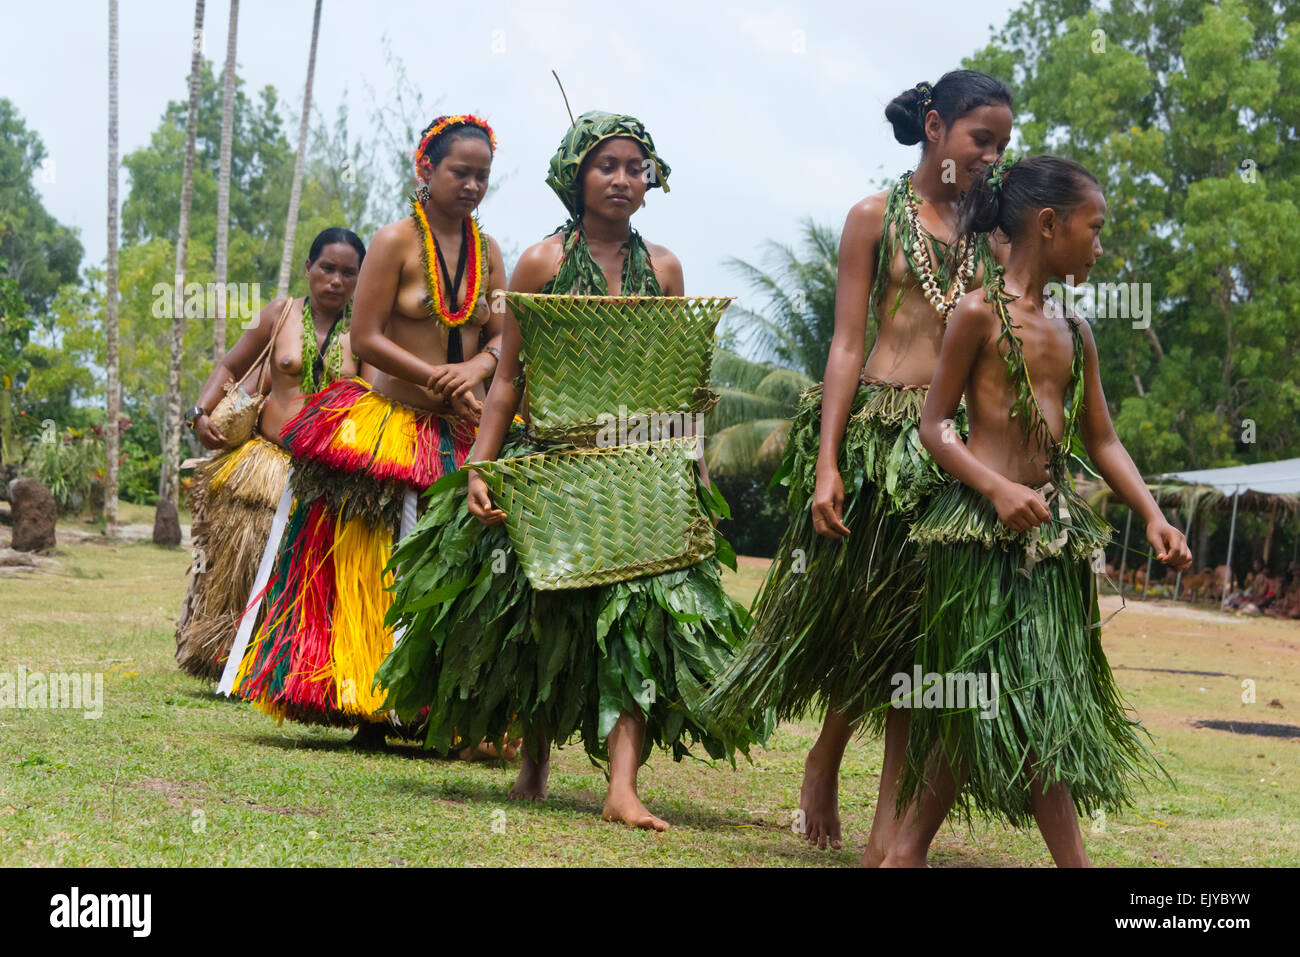 Yapese girls wearing different styles of grass skirts at Yap Day Festival, Yap Island, Federated States of Micronesia Stock Photo